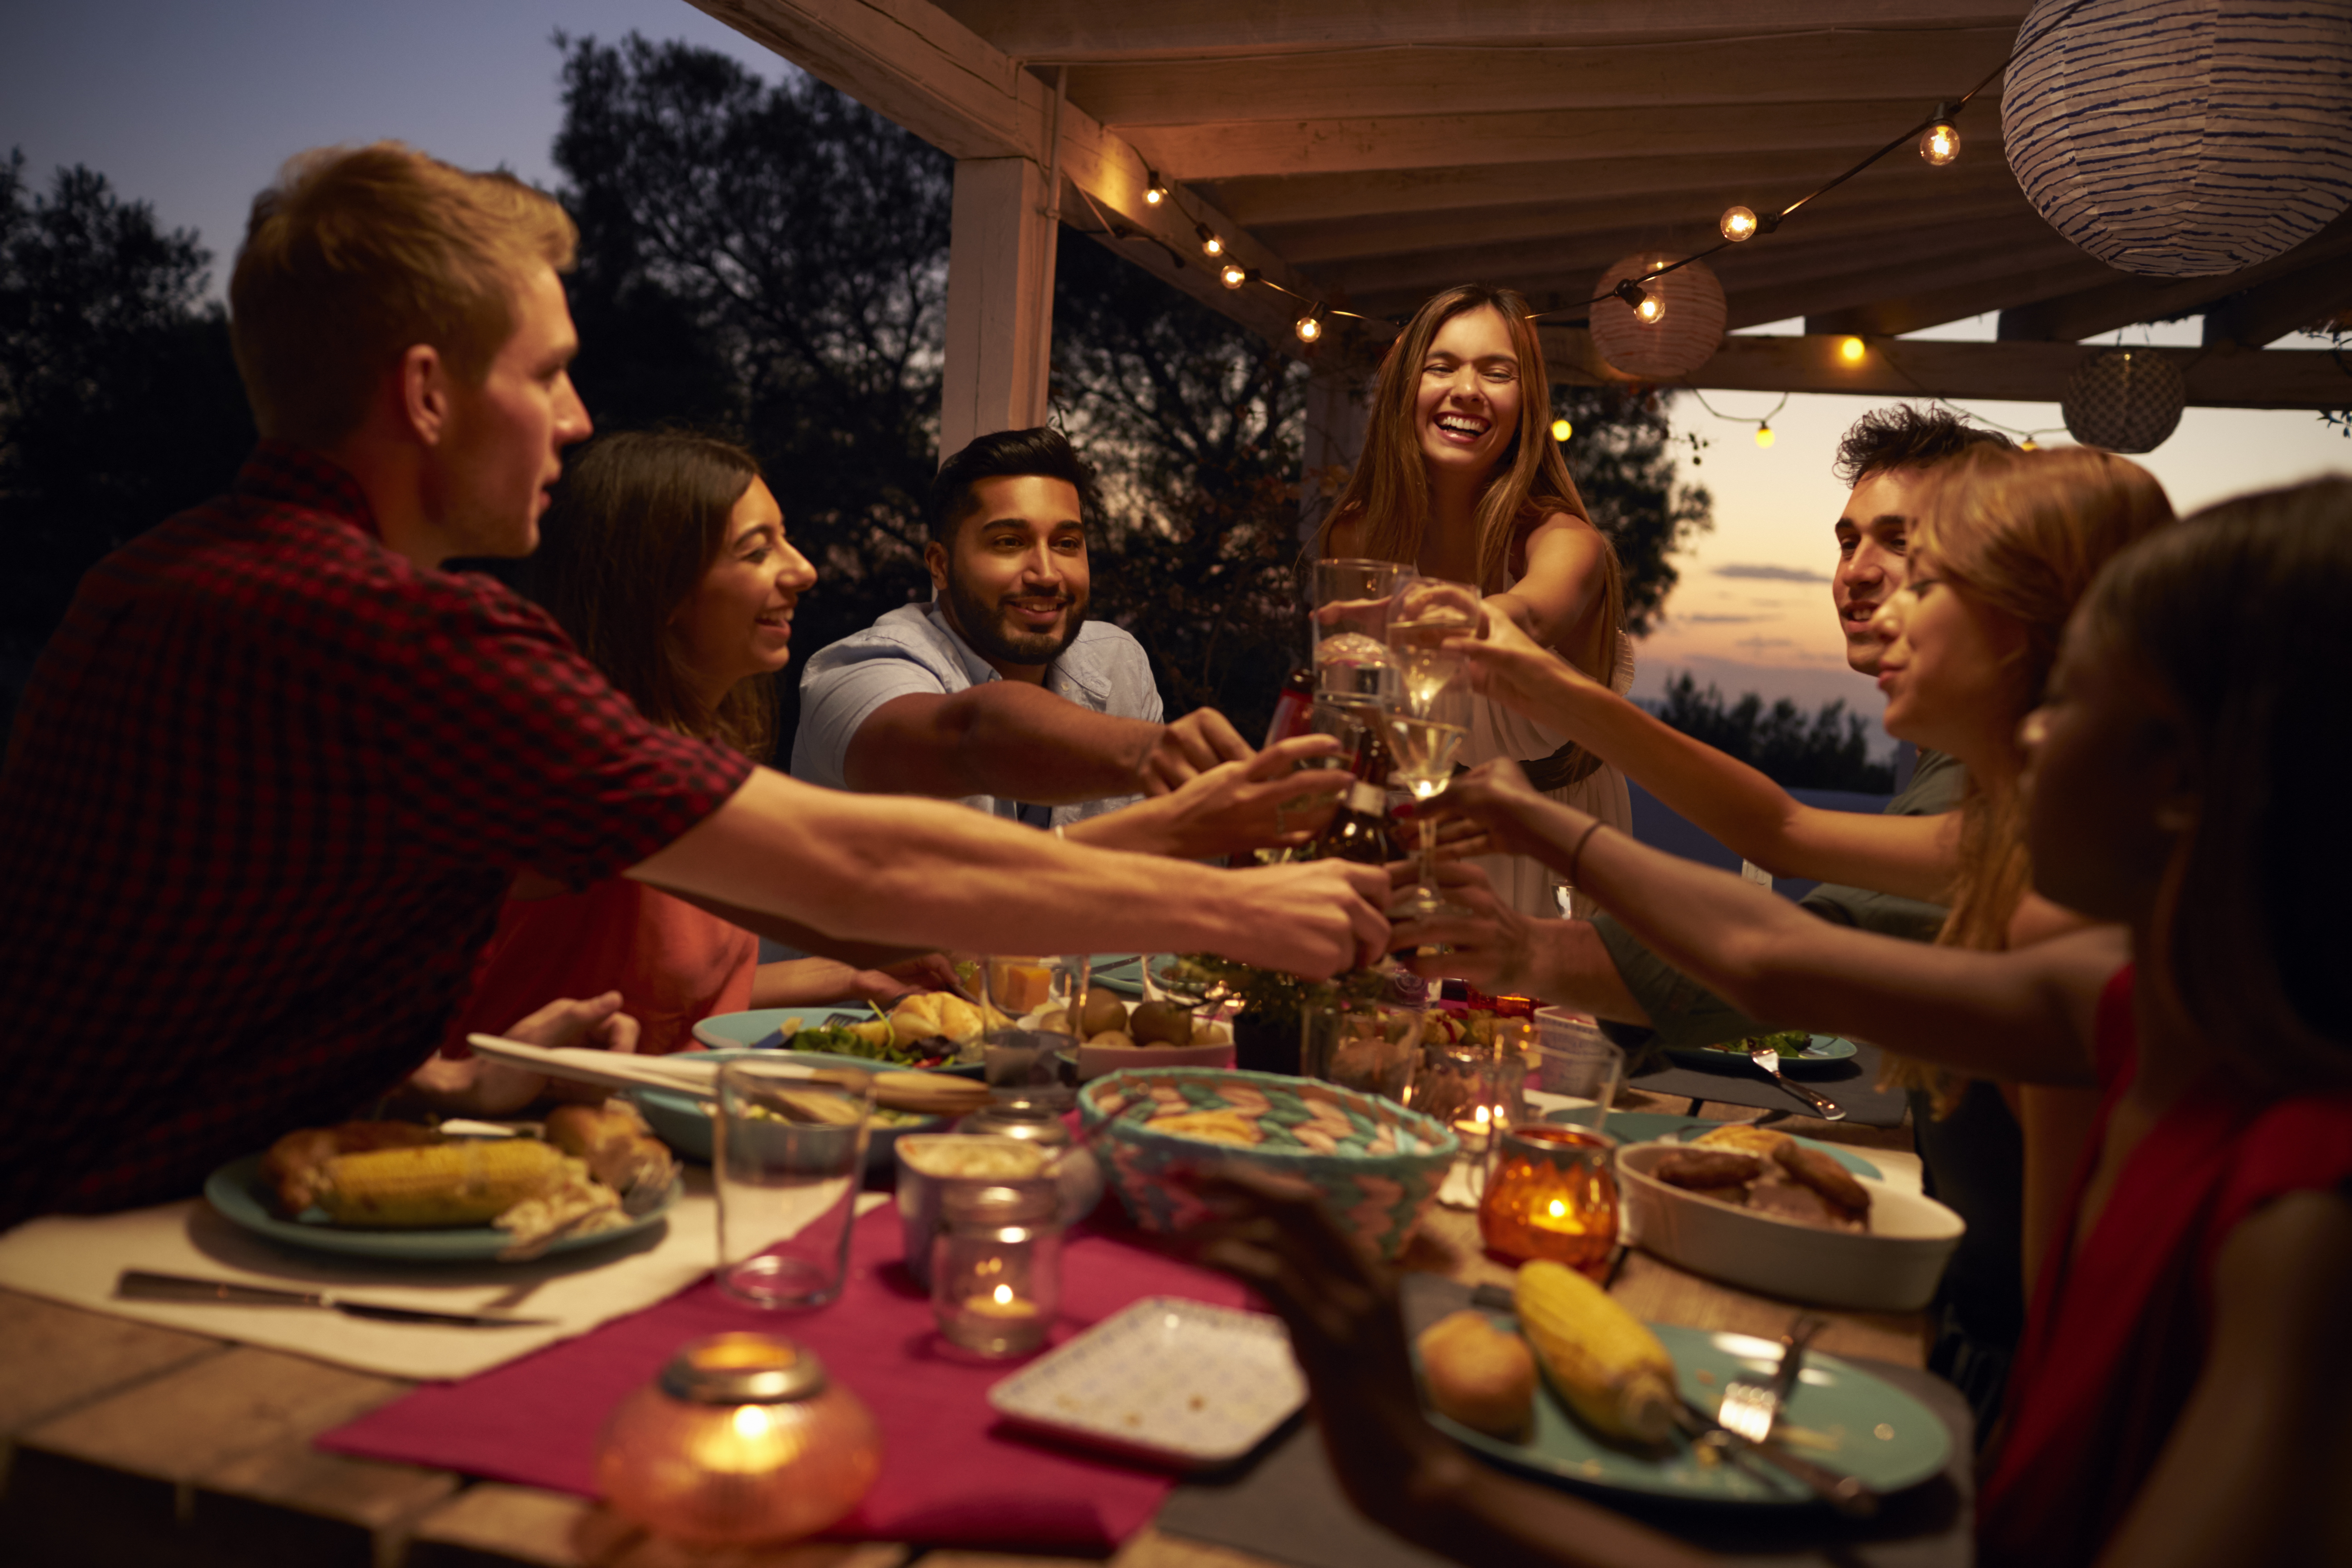 A group of friends is pictured raising toasts at a party | Source: Shutterstock